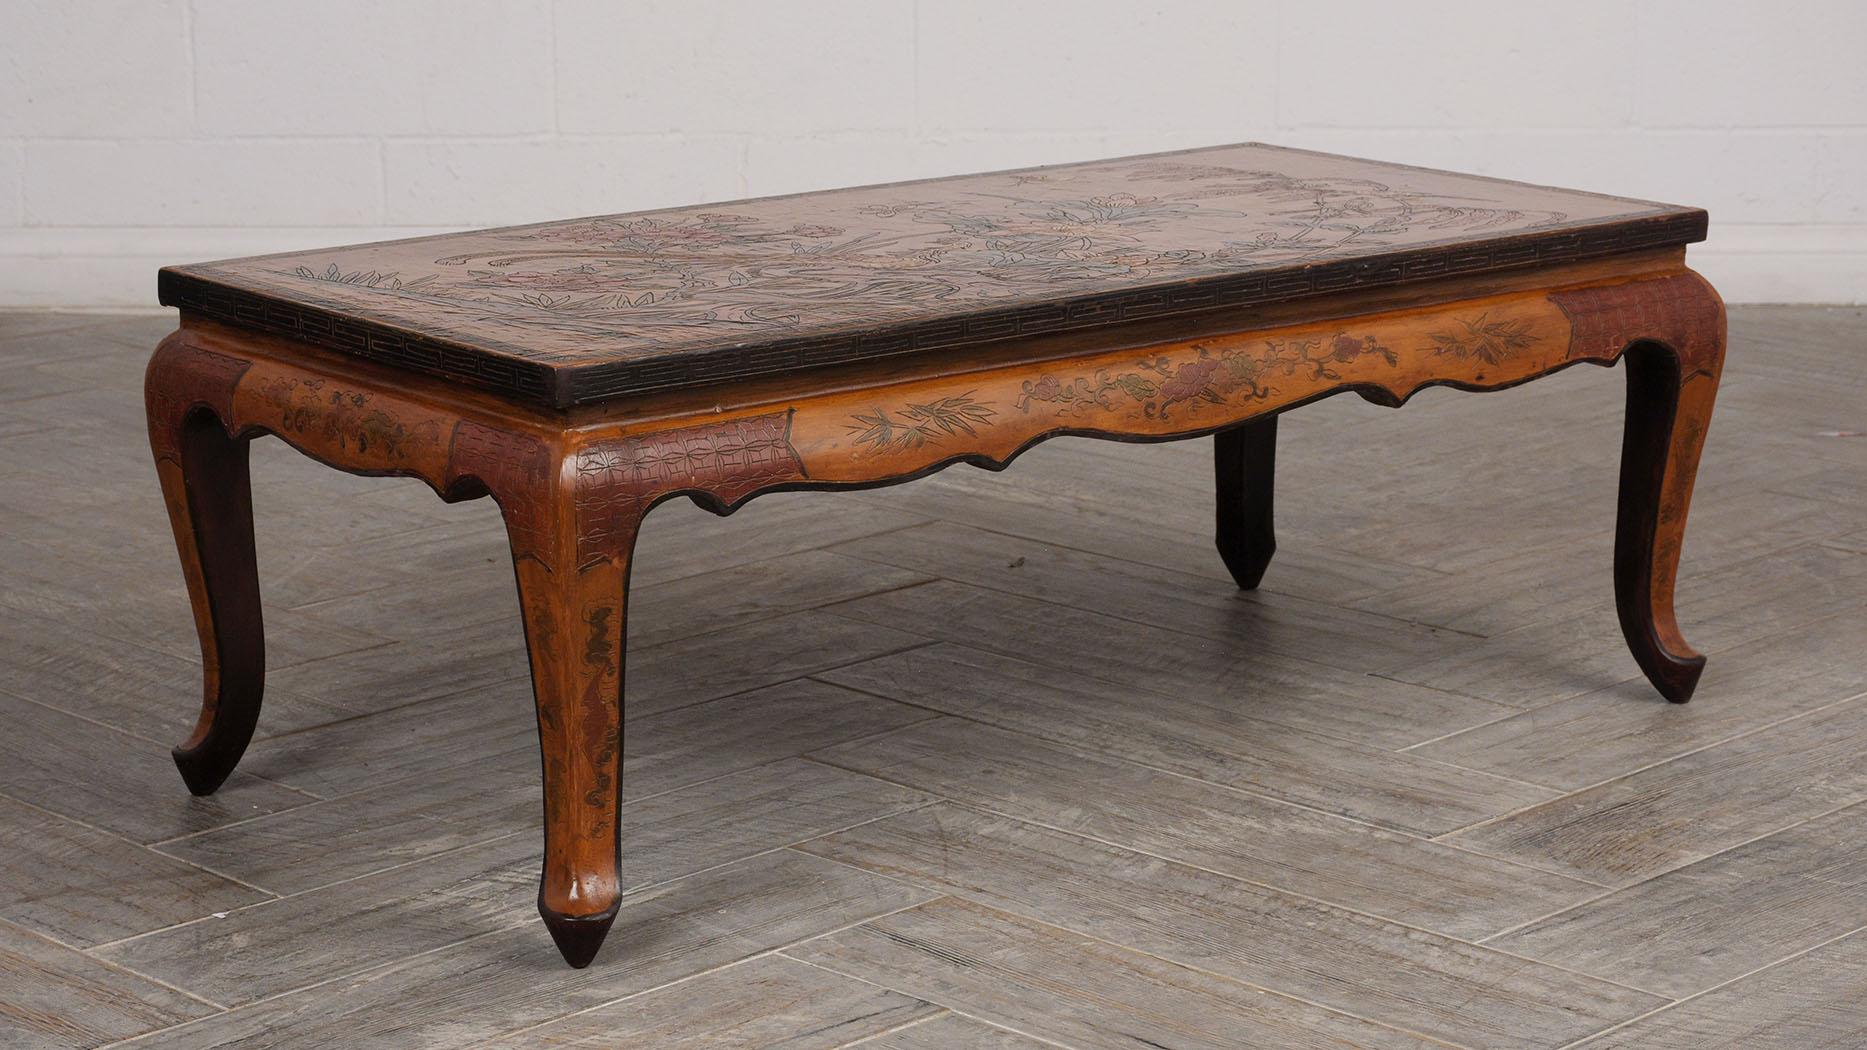 Unique French Chinoiserie Painted Low Coffee Table (Handgeschnitzt)